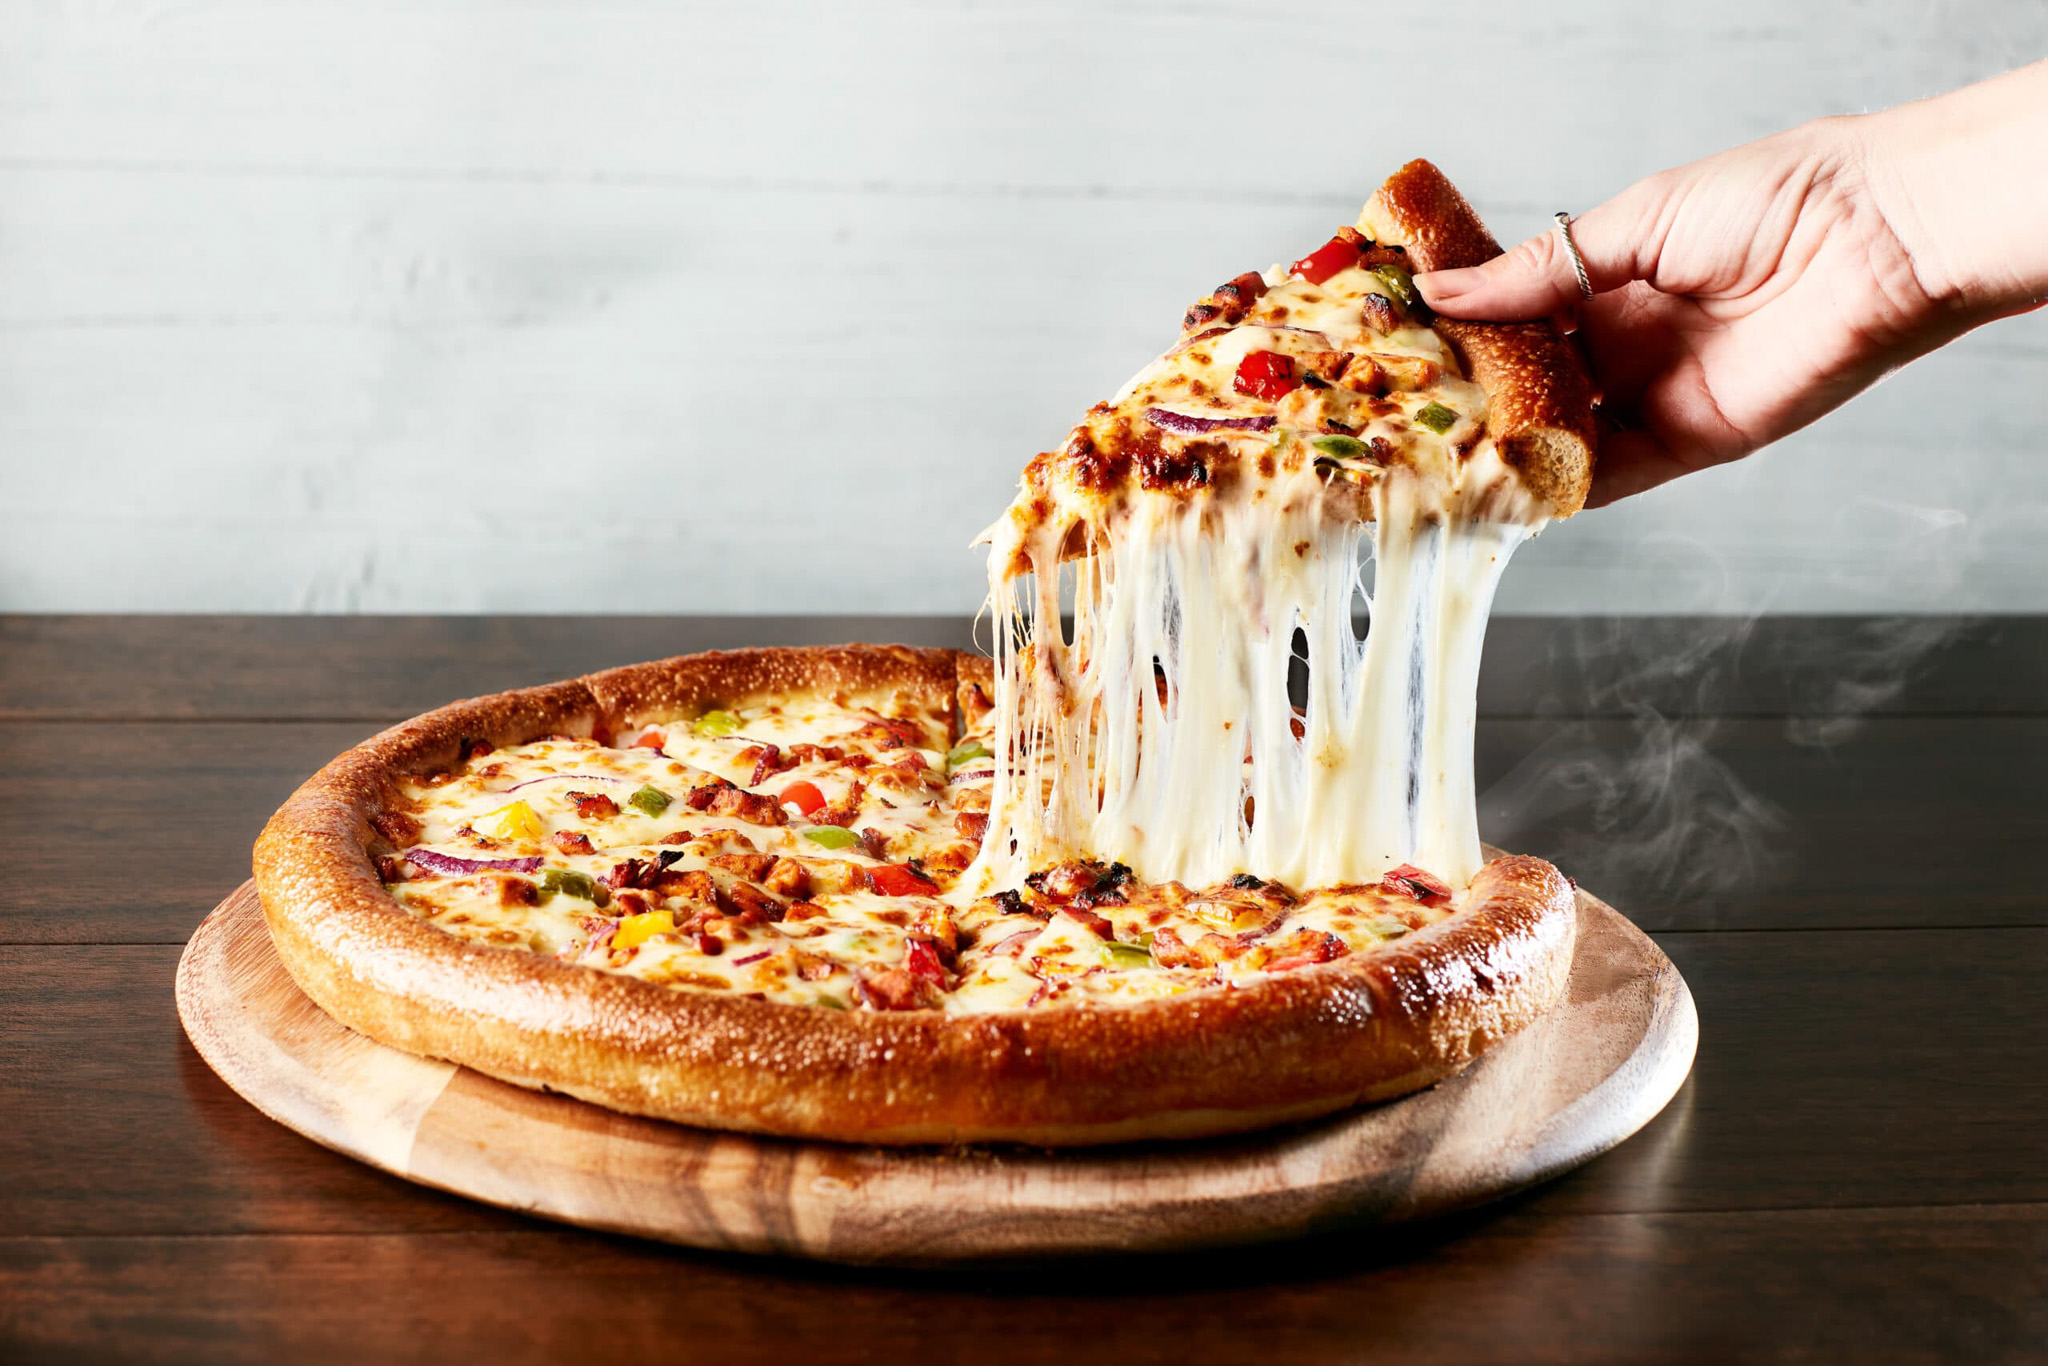 Freshly baked pizza with gooey melted cheese being served.